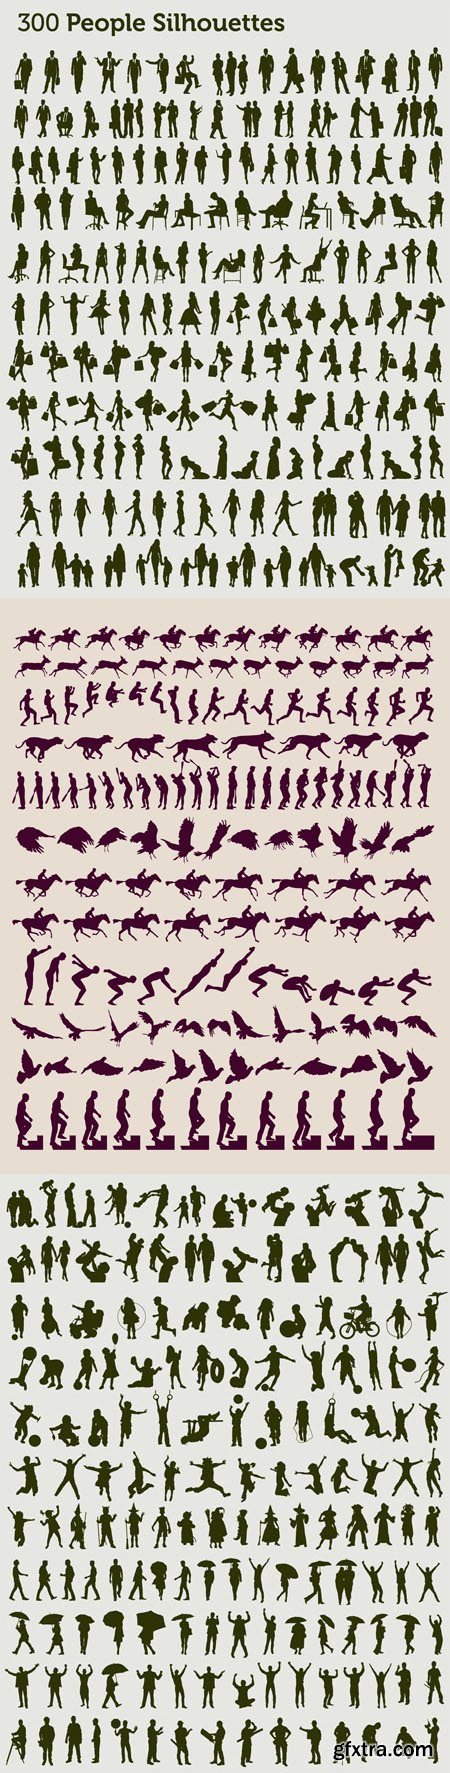 Human & Animal Silhouettes Pack in Vector